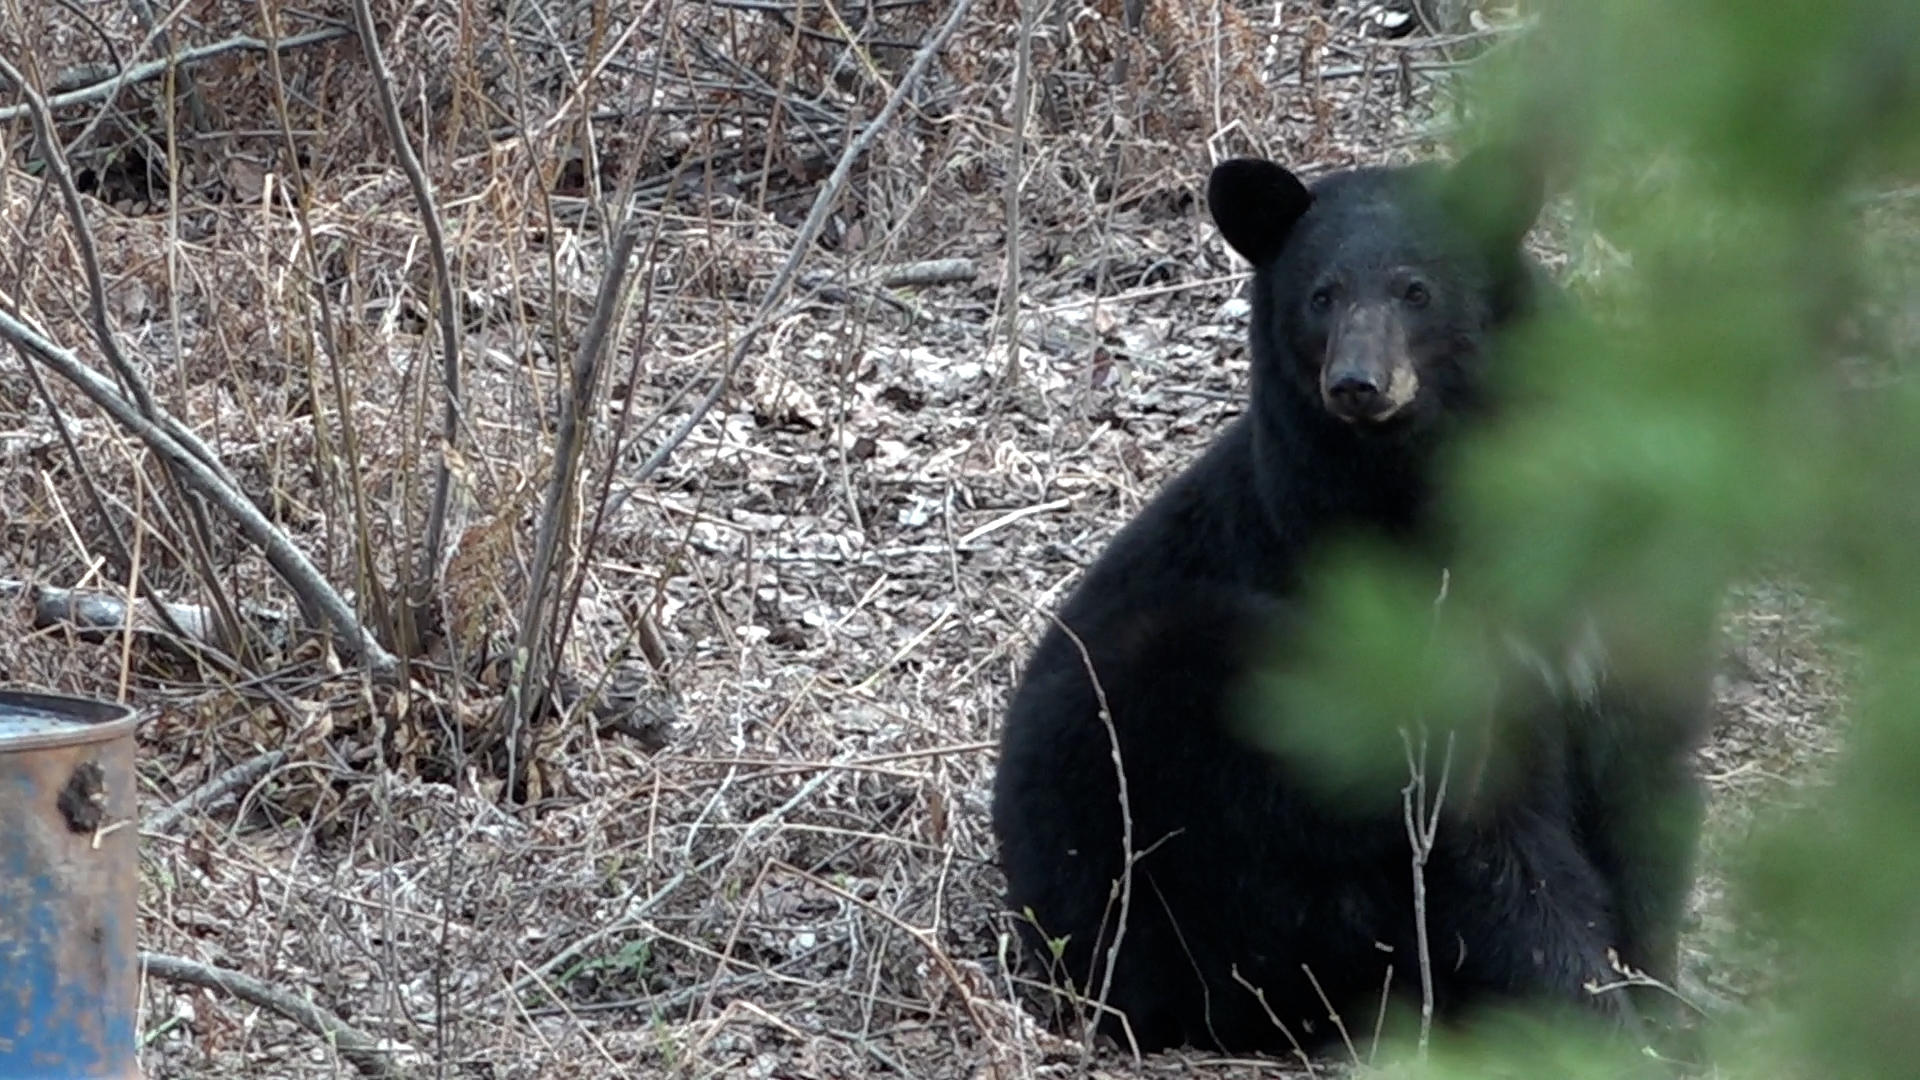 A black bear sitting in the grass near some bushes.